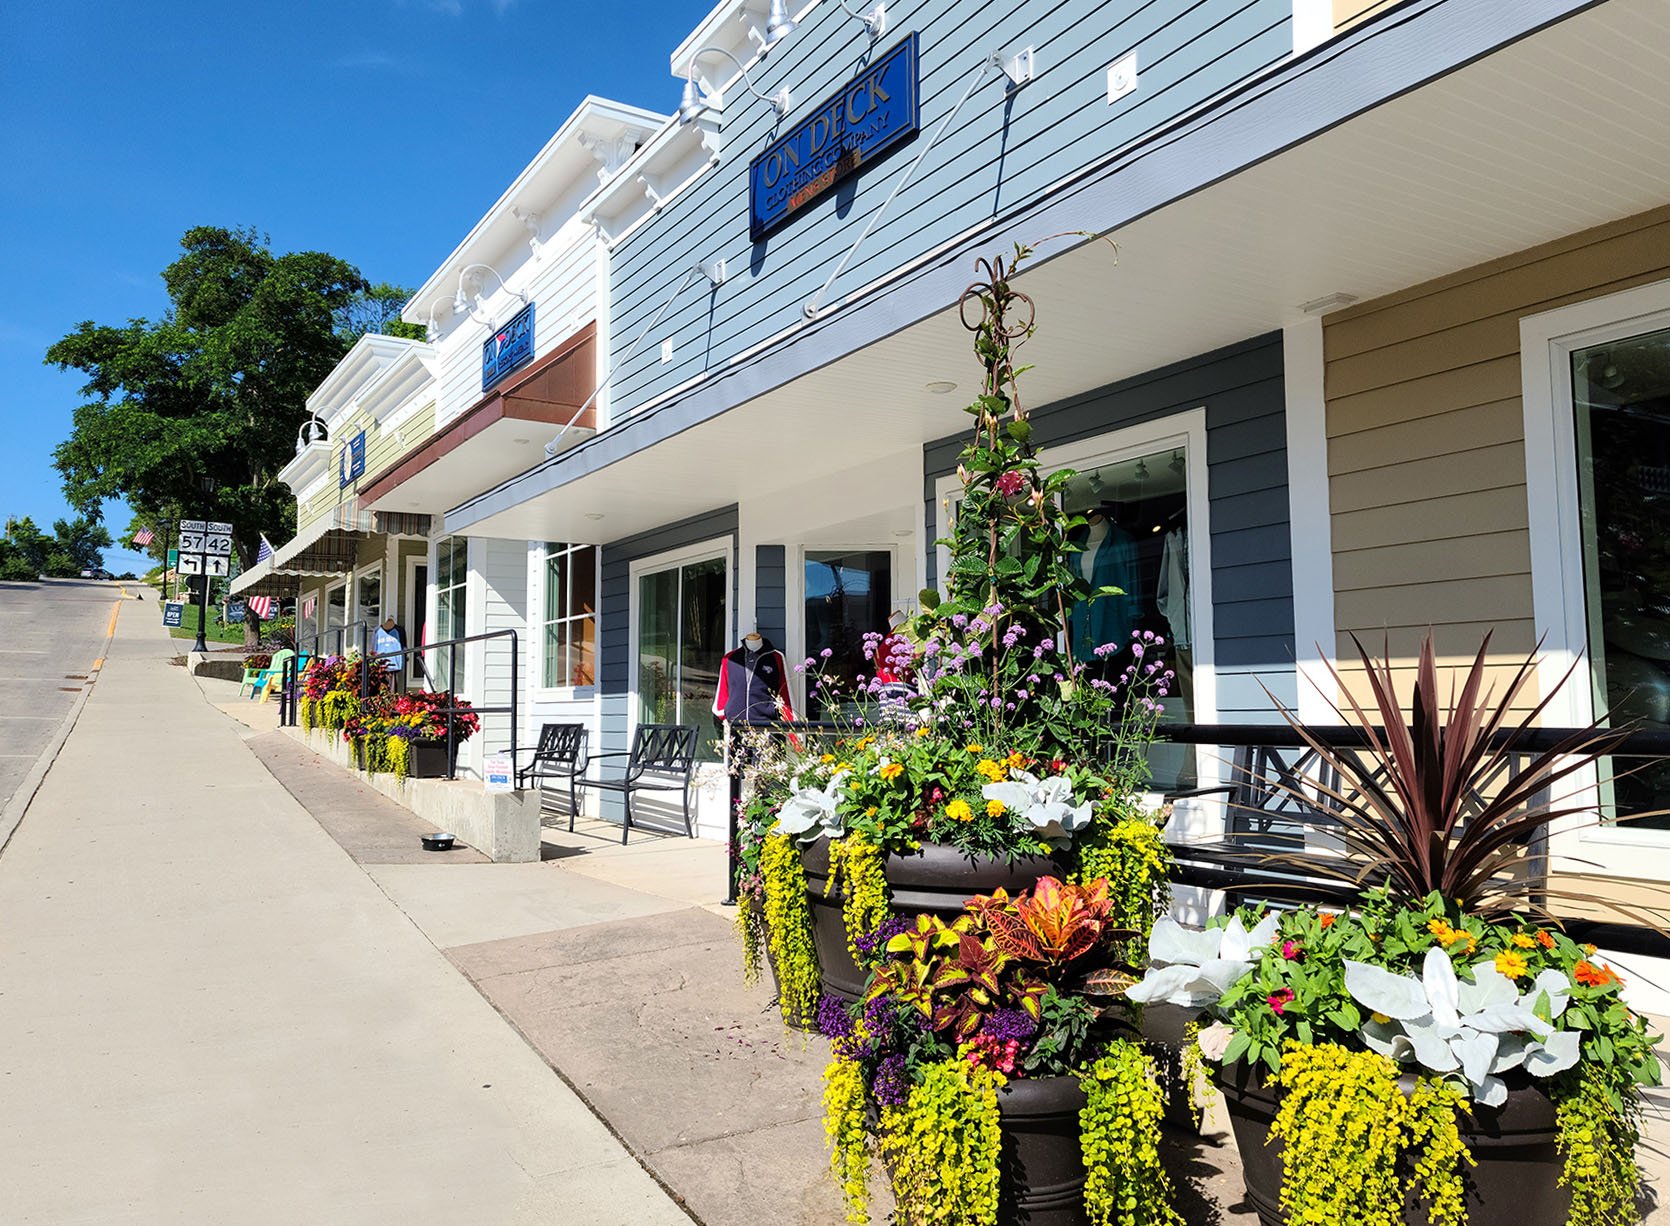 Stop by @ondeck_clothing on the hill in Sister Bay to shop their new spring clothing, footwear, and accessories for men and women. They have laid-back women&rsquo;s styles at On Deck Resort, and Bills Dry Goods offers Door County&rsquo;s largest sele